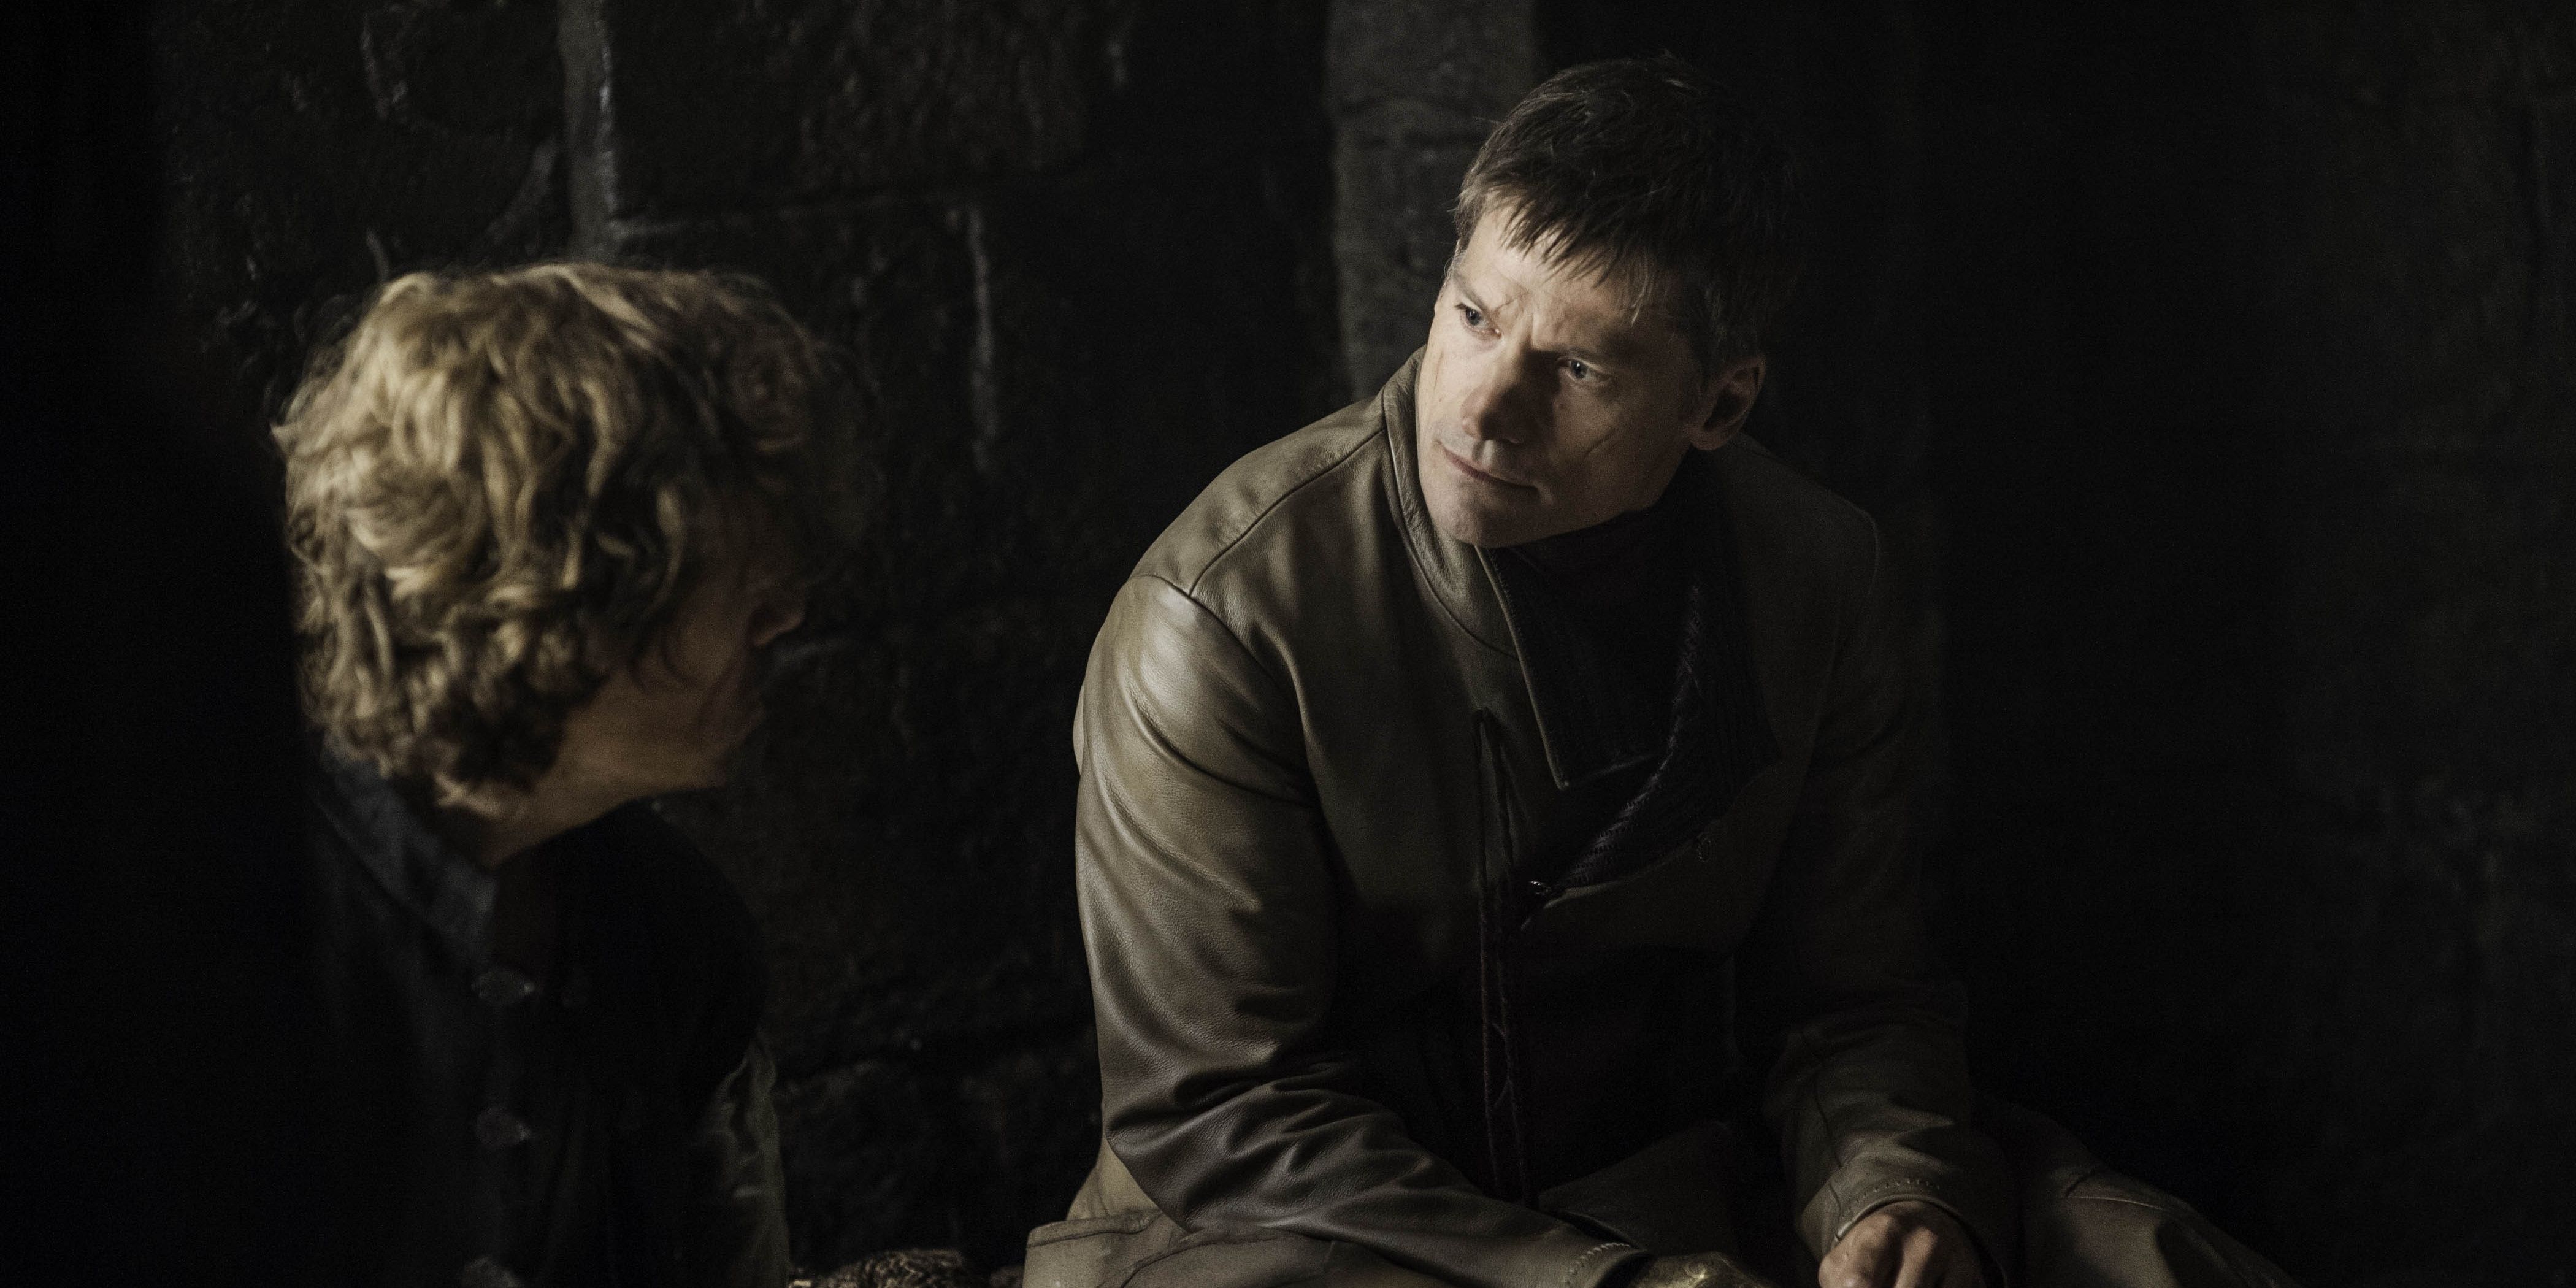 Jaime and Tyrion Lannister talk in Game of Thrones